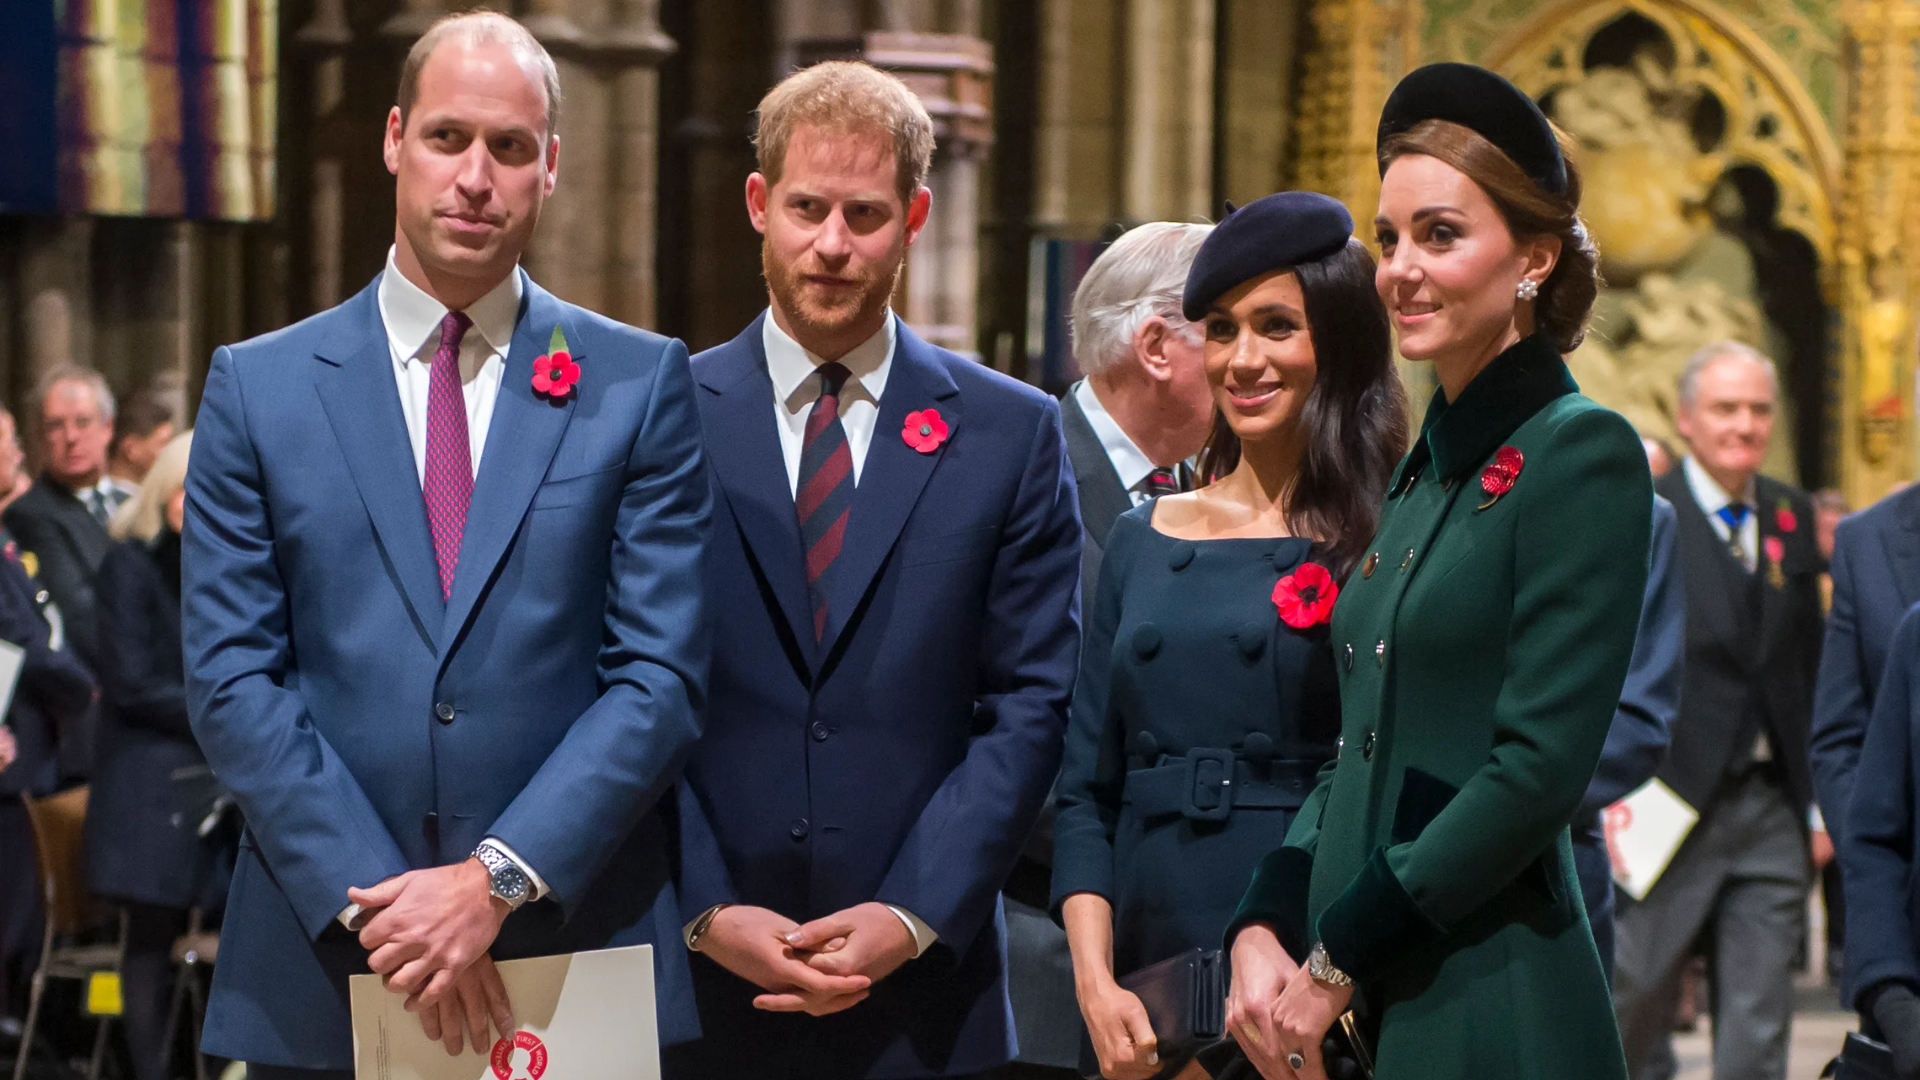 Prince Harry And Meghan Markle Were Not Informed About Kate Middleton’s Cancer Due To Alleged Trust Issues: Reports